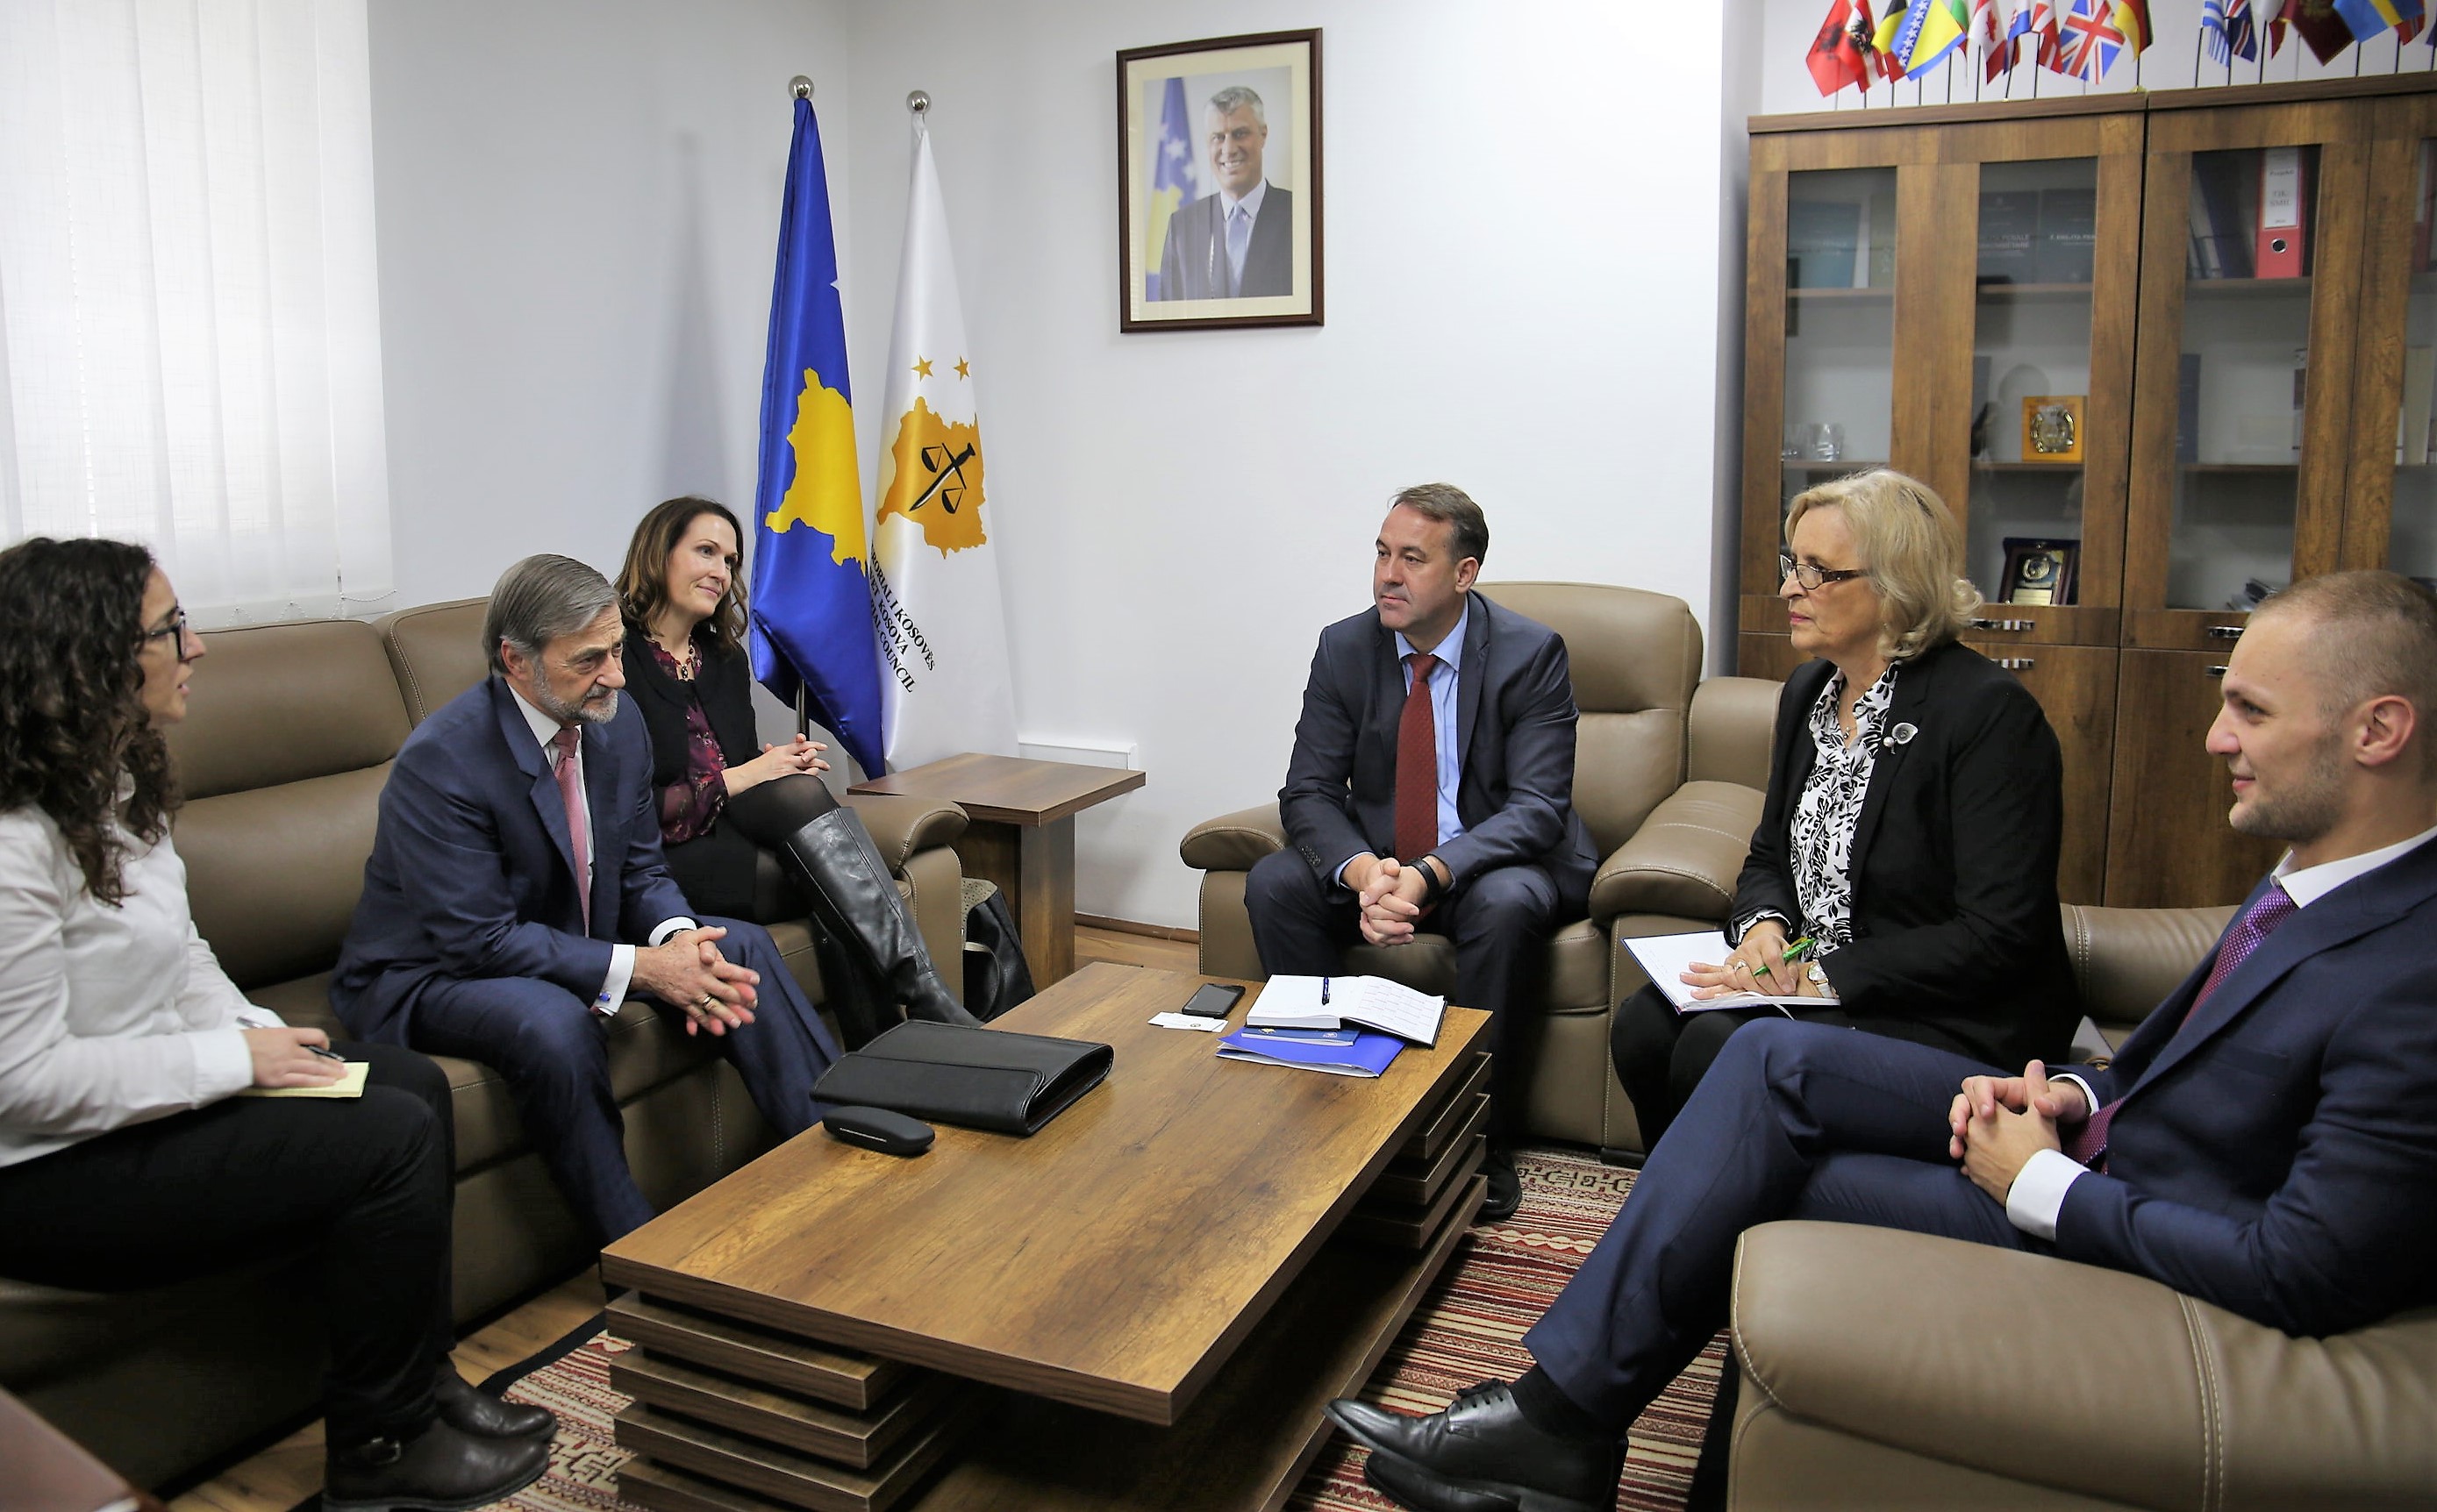 Chairman Hyseni meets OPDAT Director for Southeast Europe